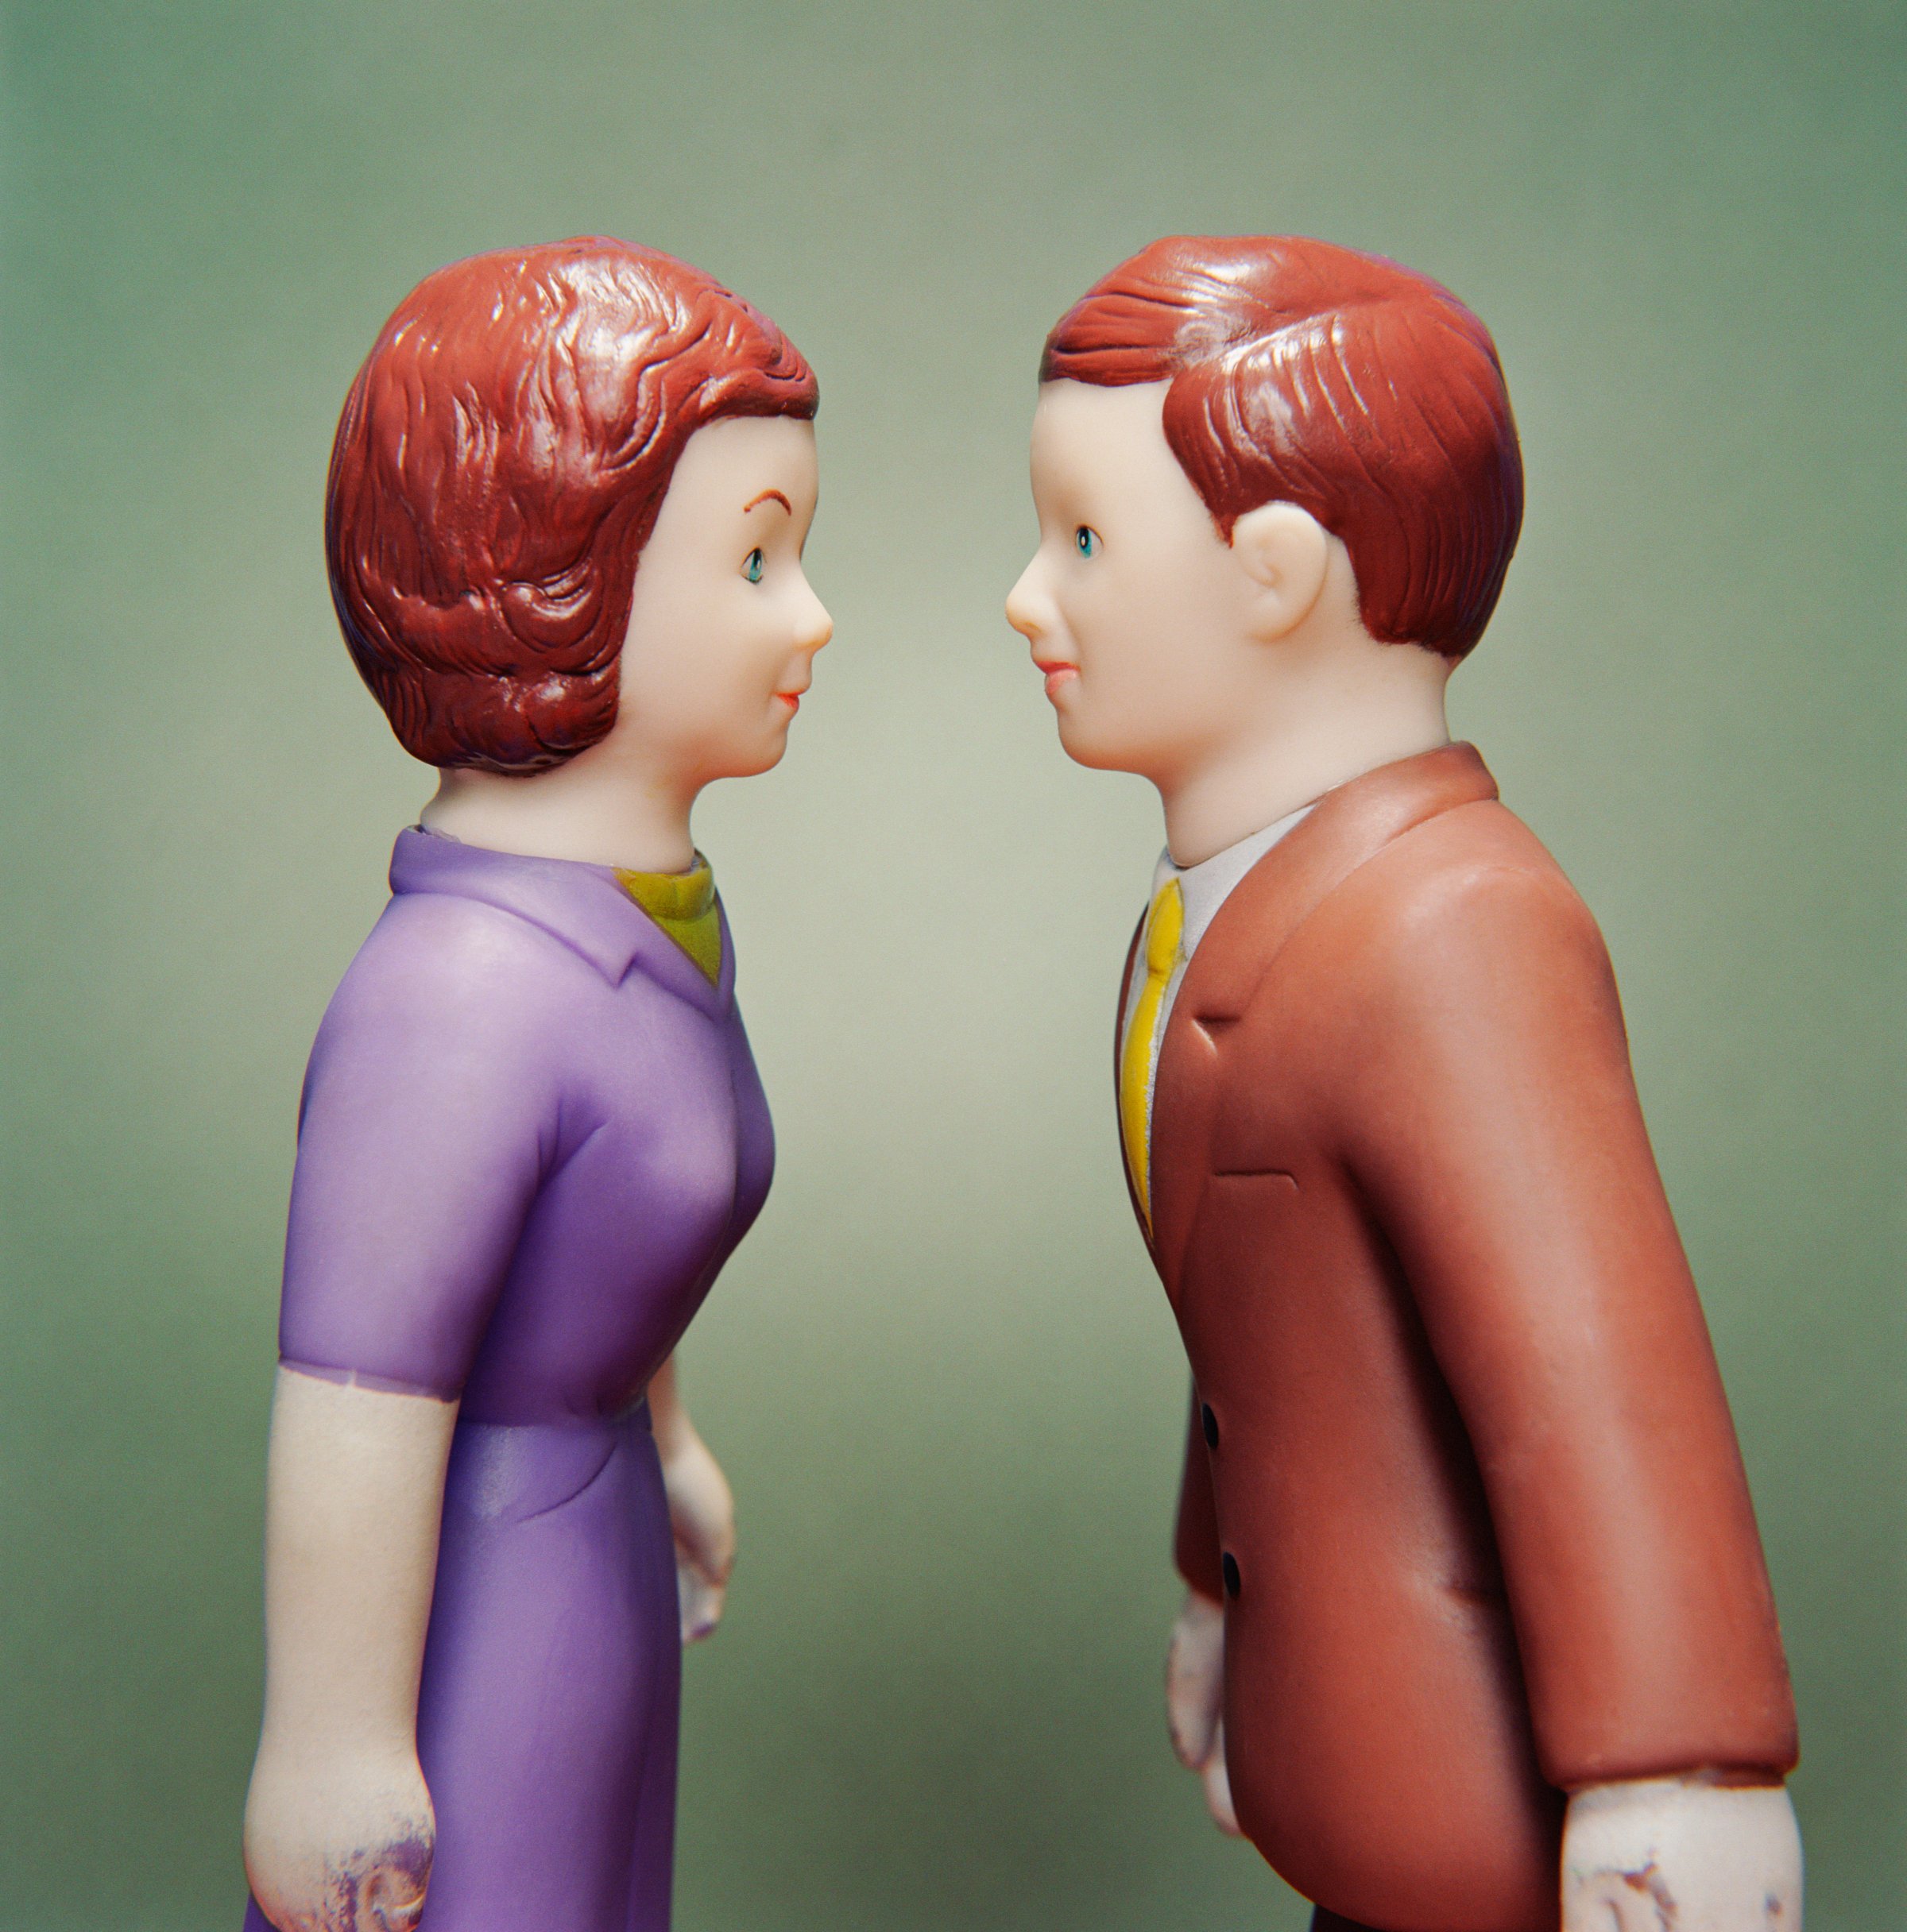 couple-figurines-facing-each-other